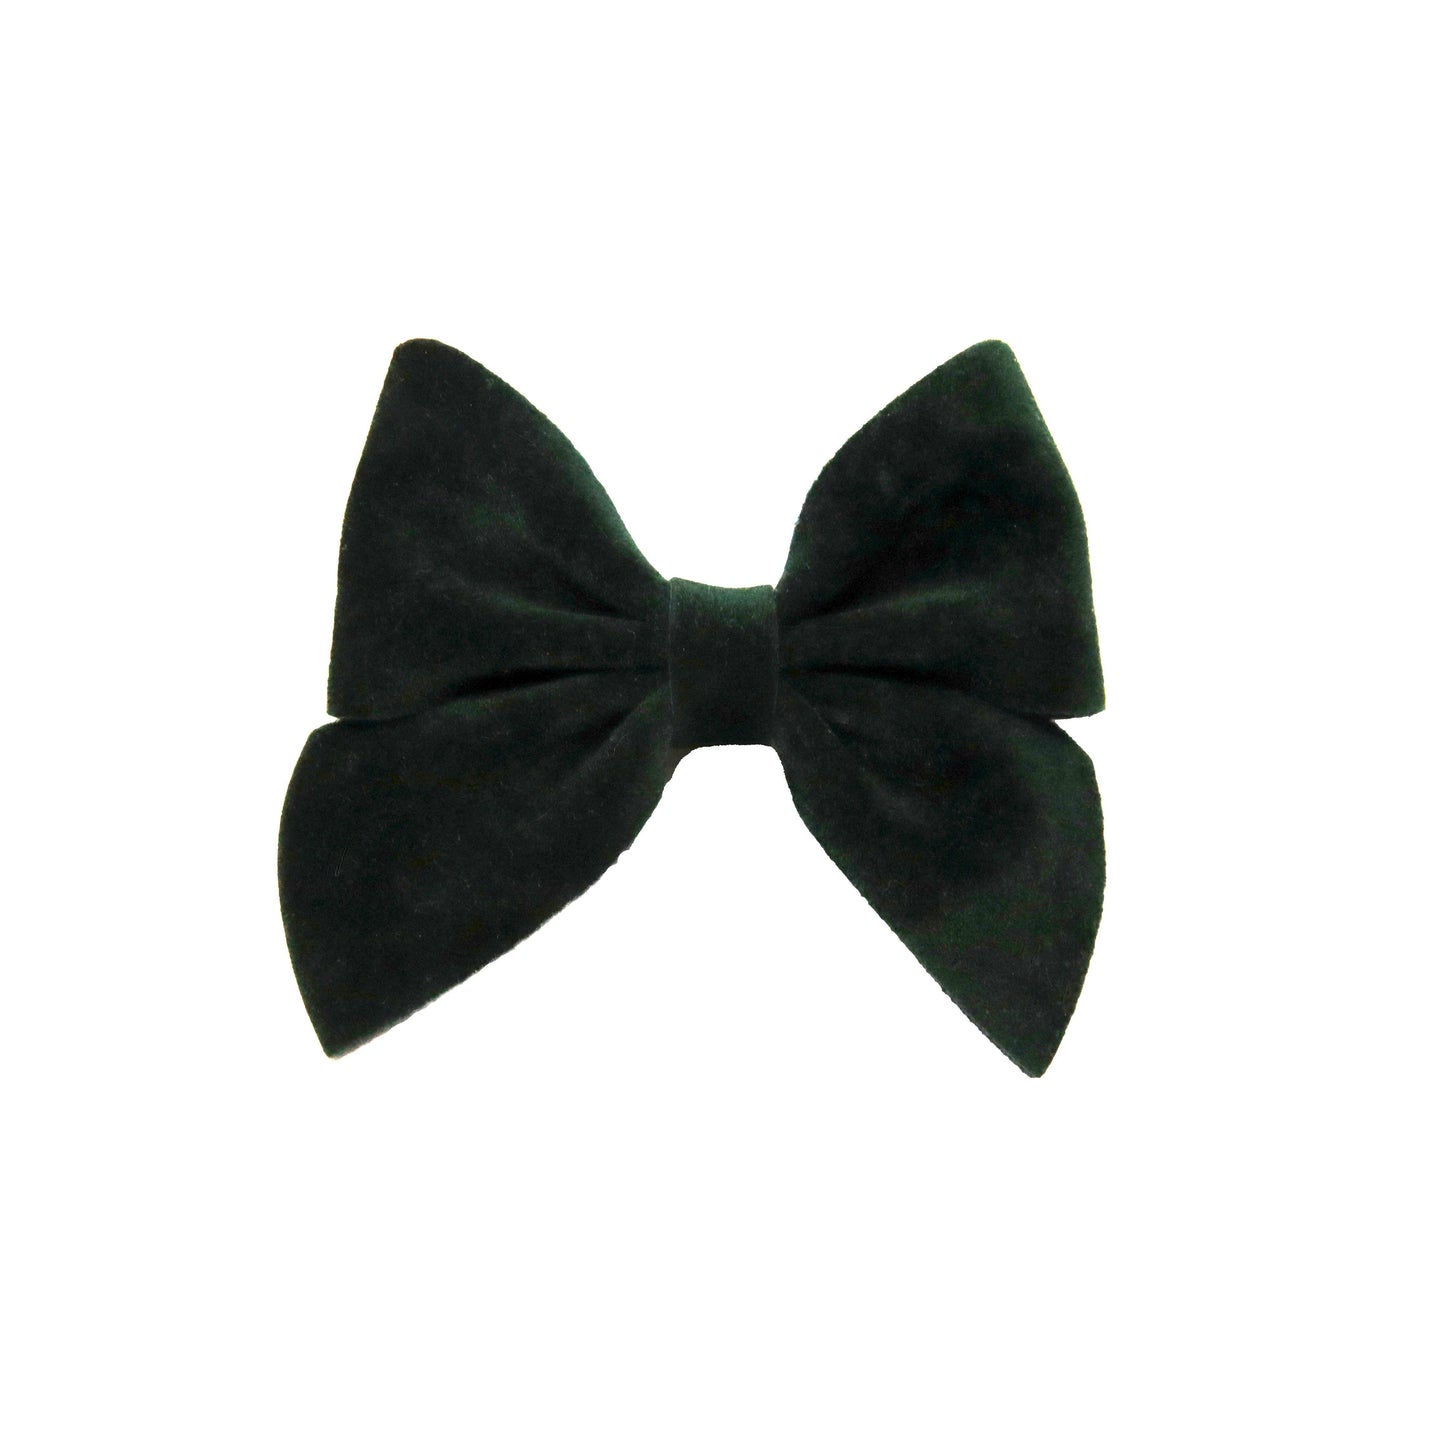 2.75 inch All Spruced Up Velvet Ladylike Bow